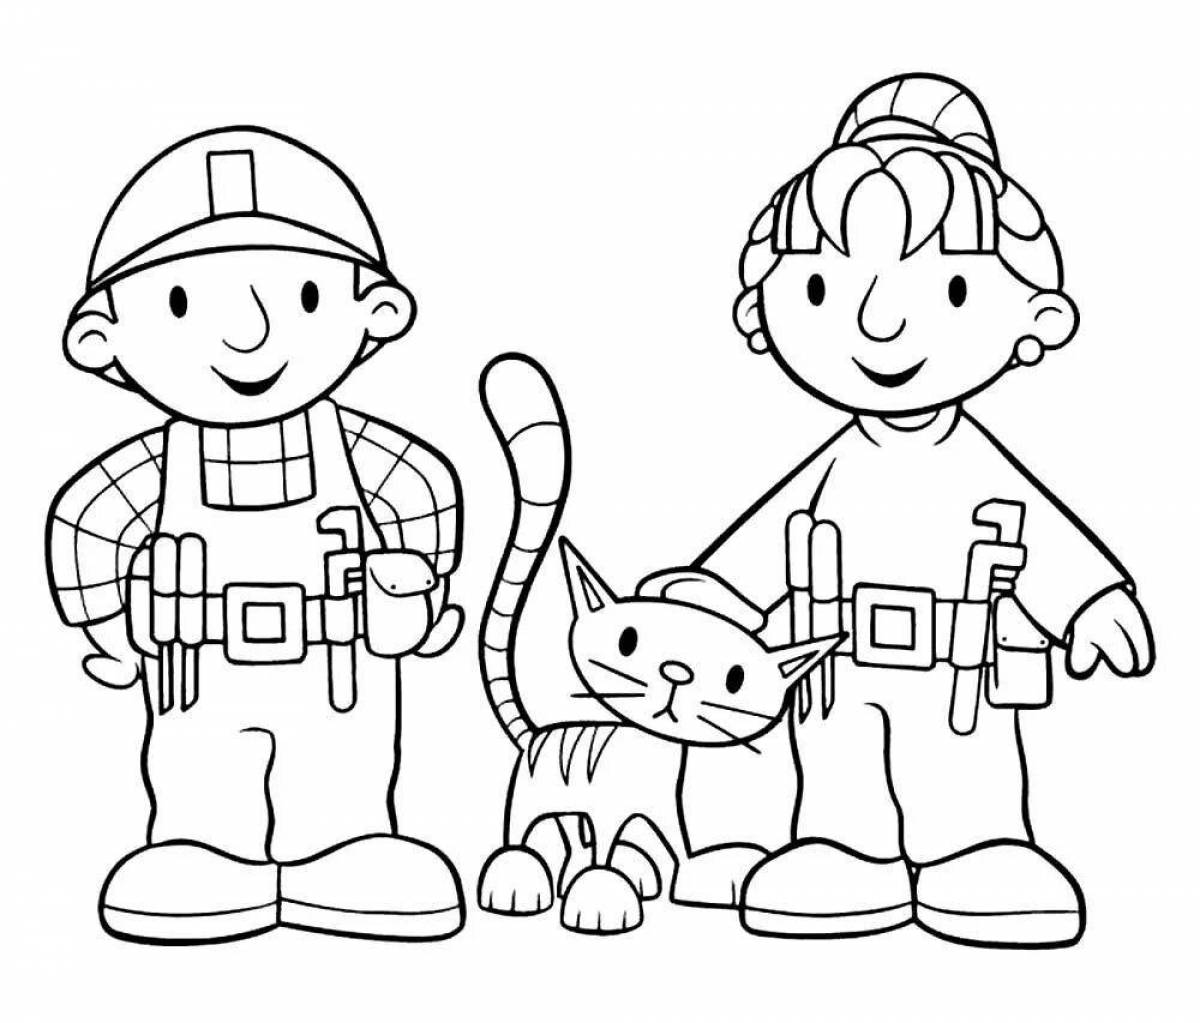 Color Filled Occupational Safety Coloring Page